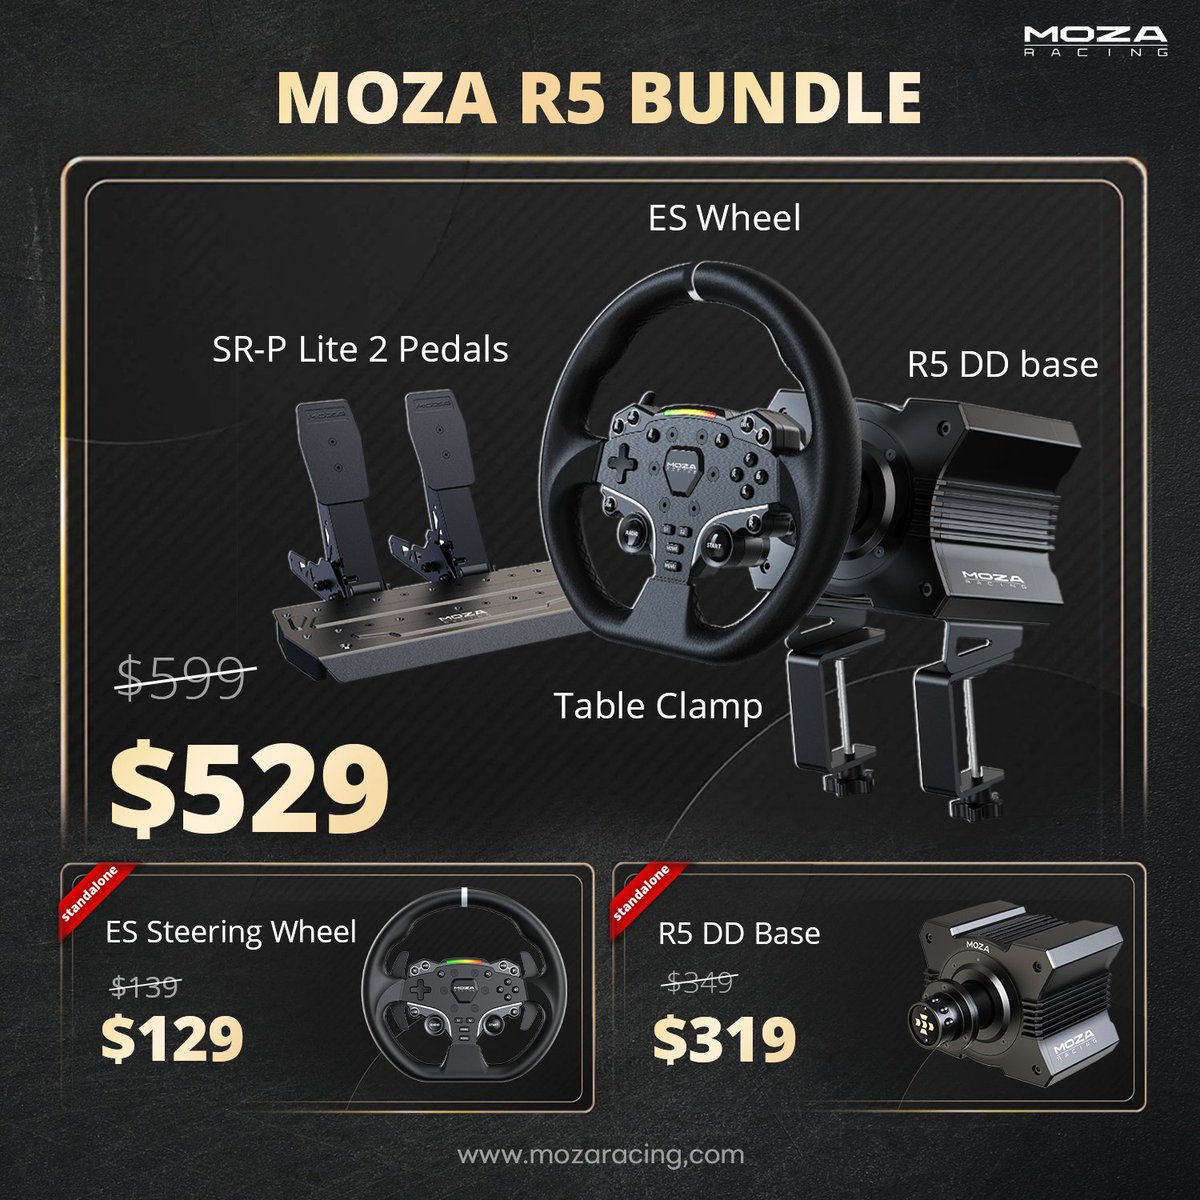 Our dedication to making high-quality gear accessible to all drives us forward!

Today we're excited to offer an unbeatable deal on the Moza R5 bundle. There's never been a better time to upgrade your sim racing setup and enjoy the thrill of DD gear! 

mozaracing.com/product/r5-bun…